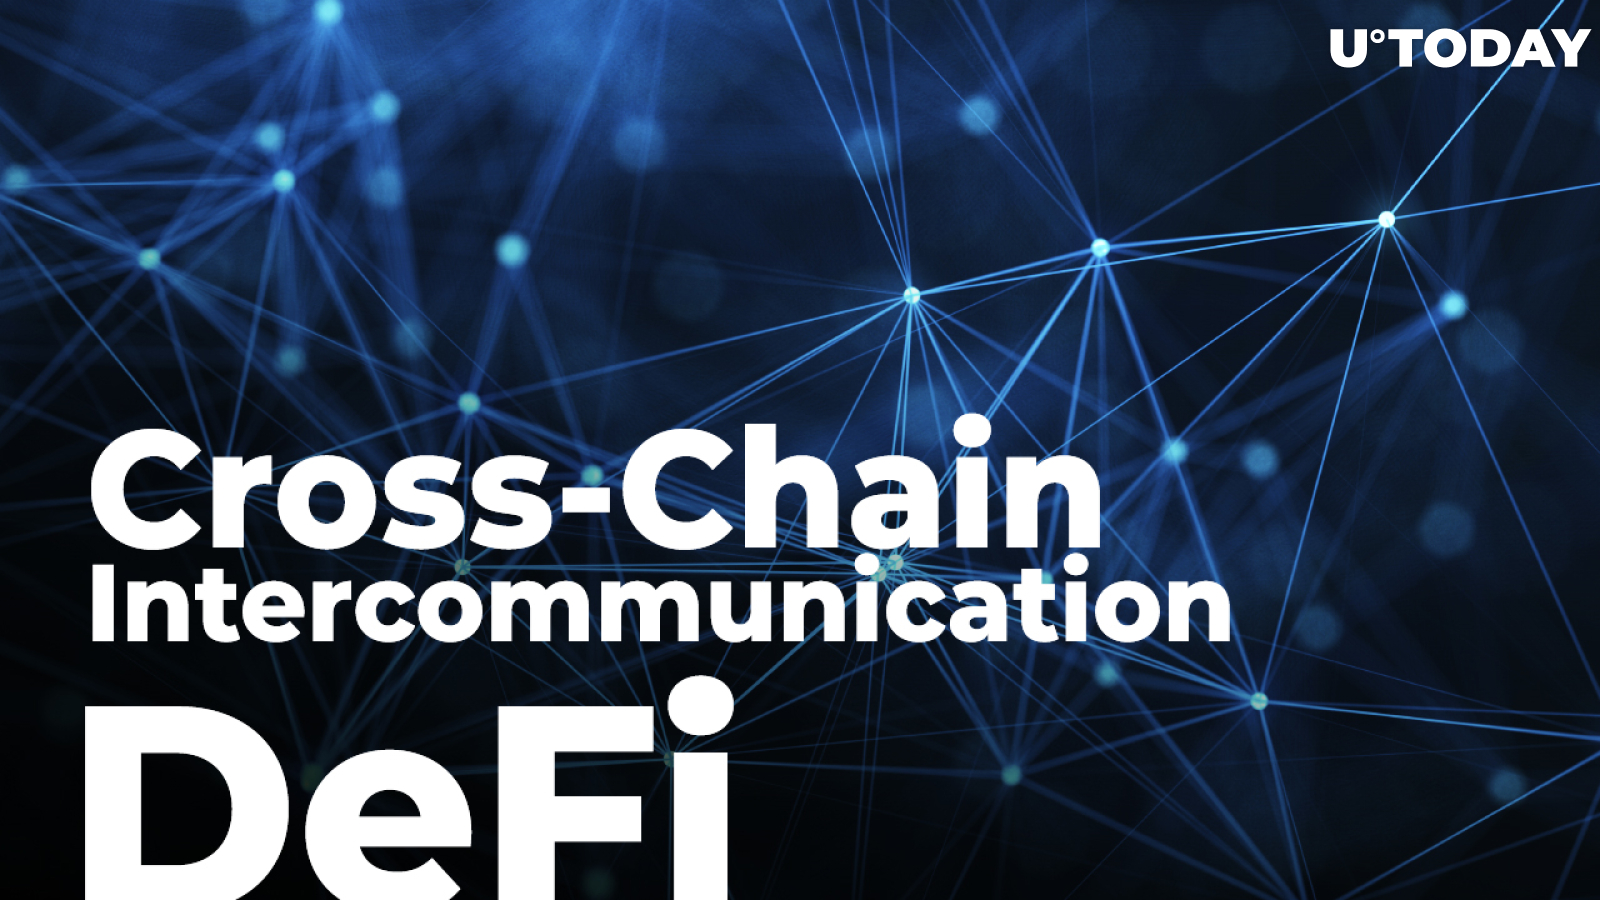 Cross-Chain Intercommunication Is Vital to Enabling DeFi Transactions Across Diverse Smart Contract Platforms